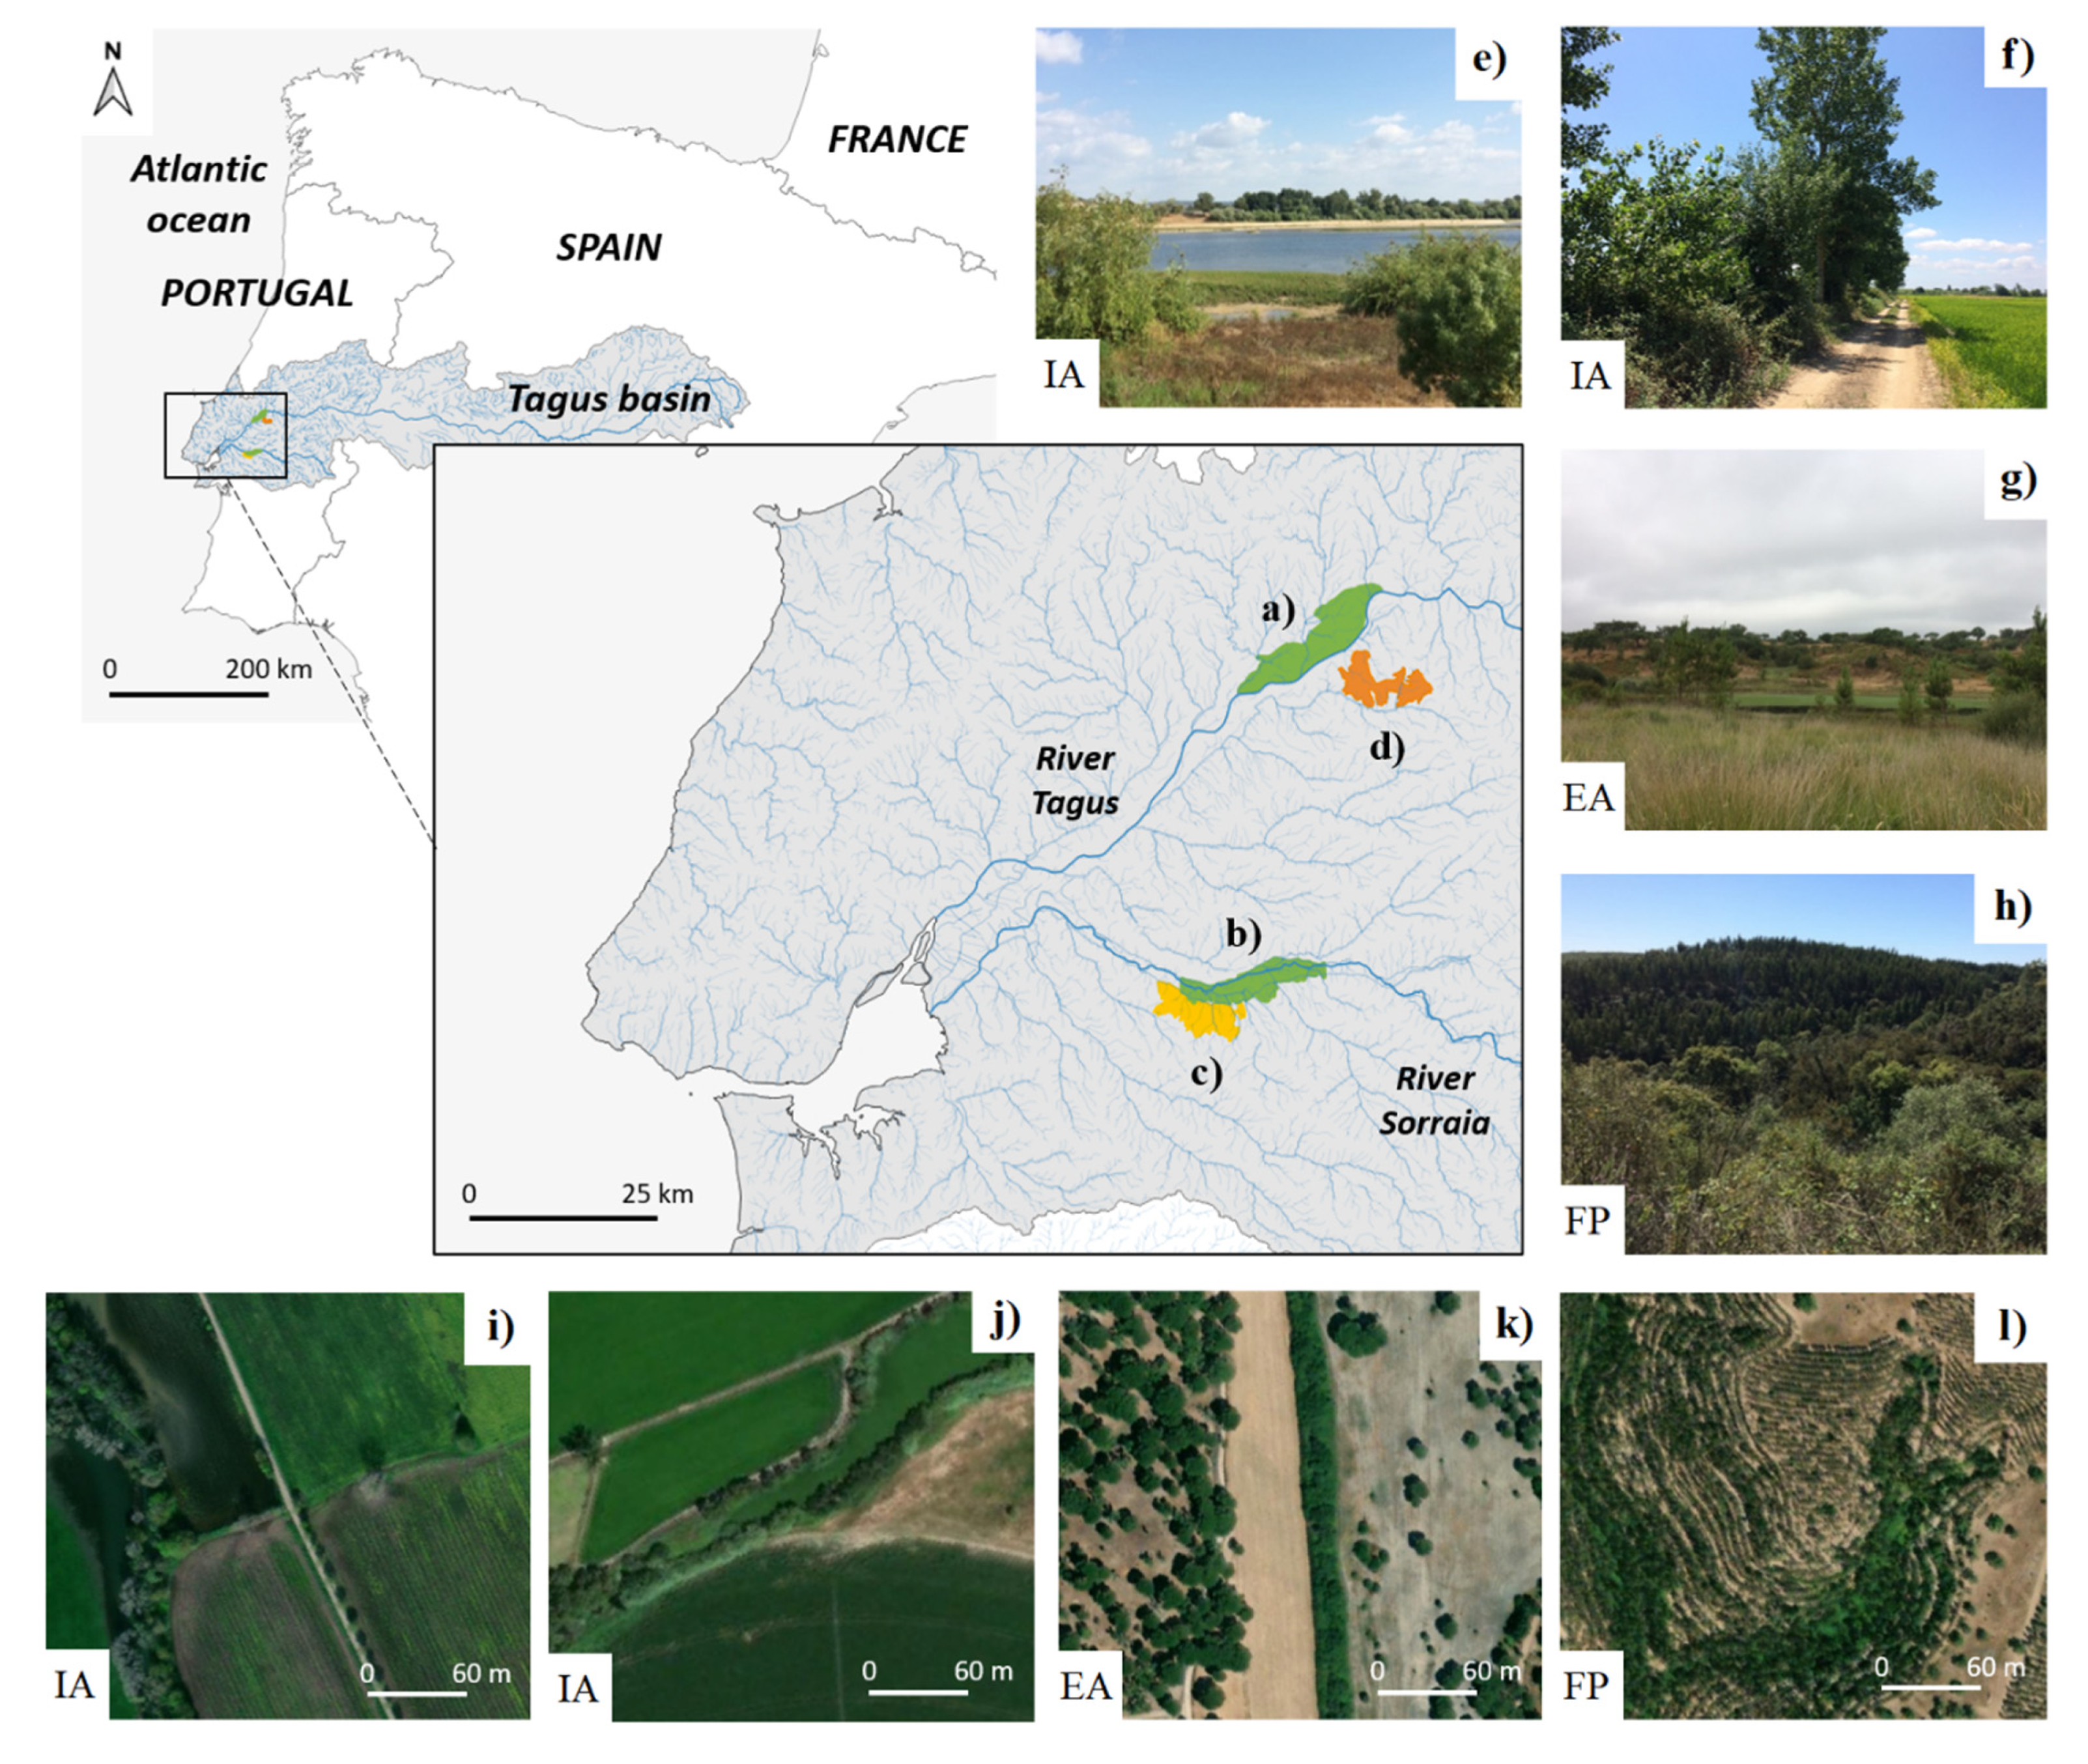 The location and vegetation physiognomy of ecological infrastructures  determine bat activity in Mediterranean floodplain landscapes -  ScienceDirect